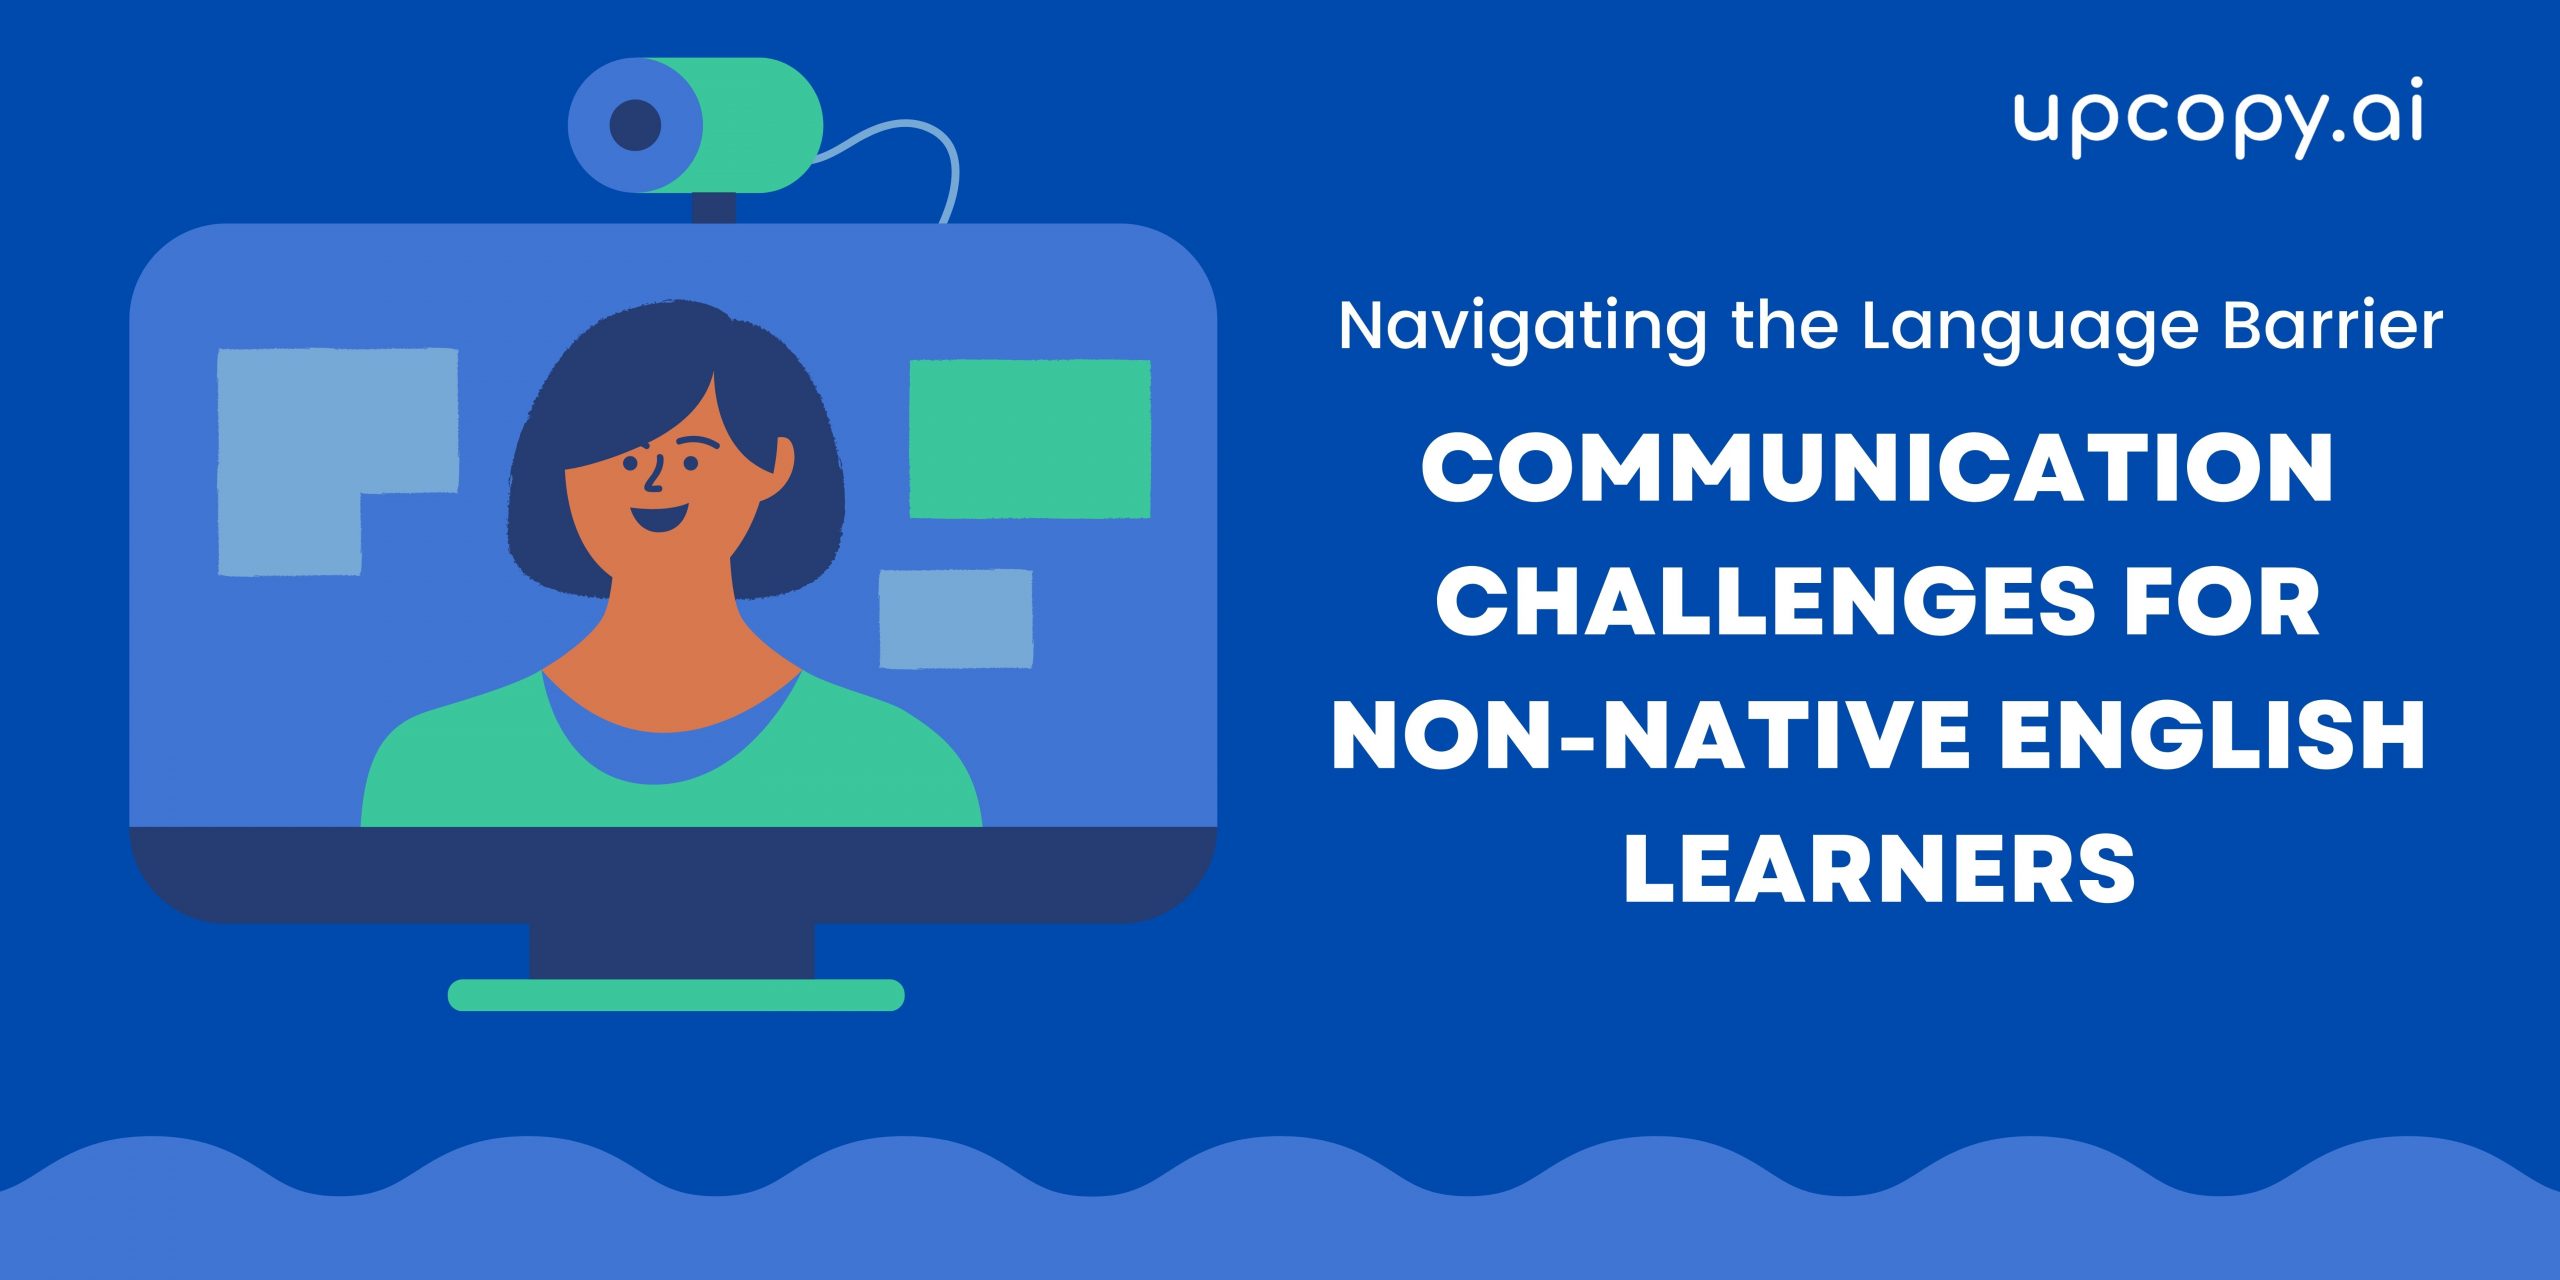 Navigating the Language Barrier: Communication Challenges for Non-Native English Learners